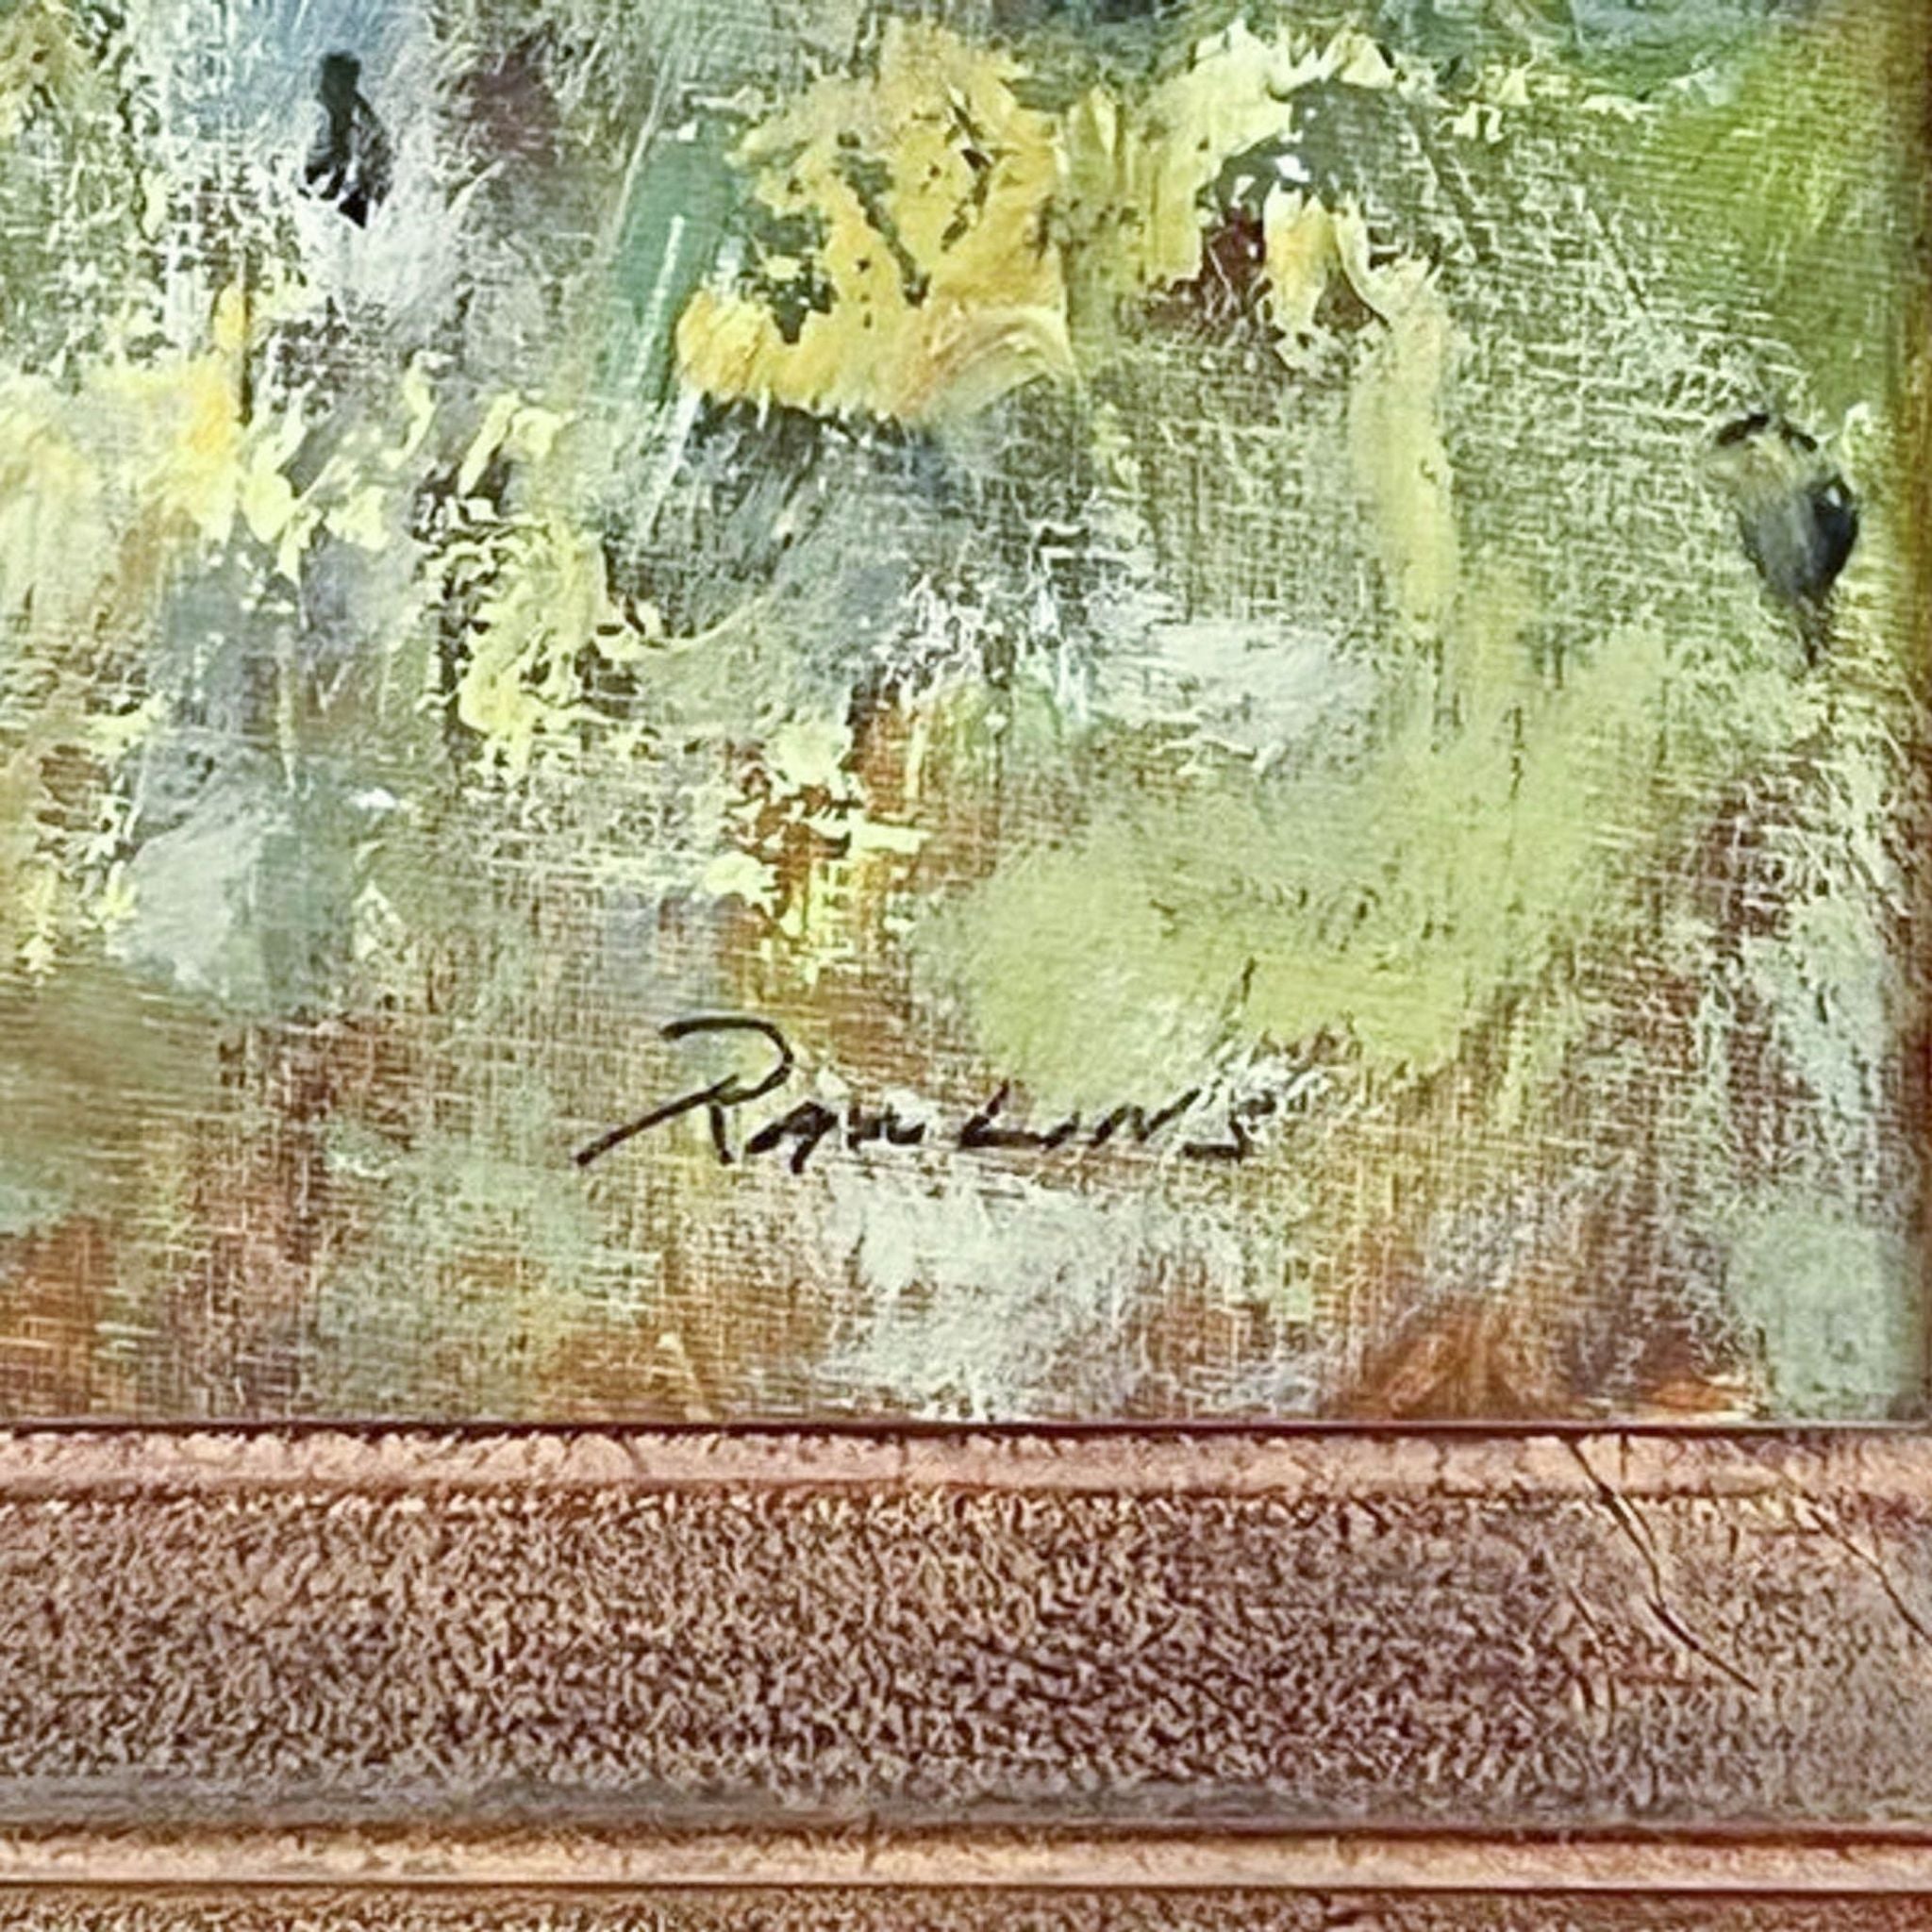 Detailed view of artist's signed work within a decorative frame, showing vibrant brushwork.